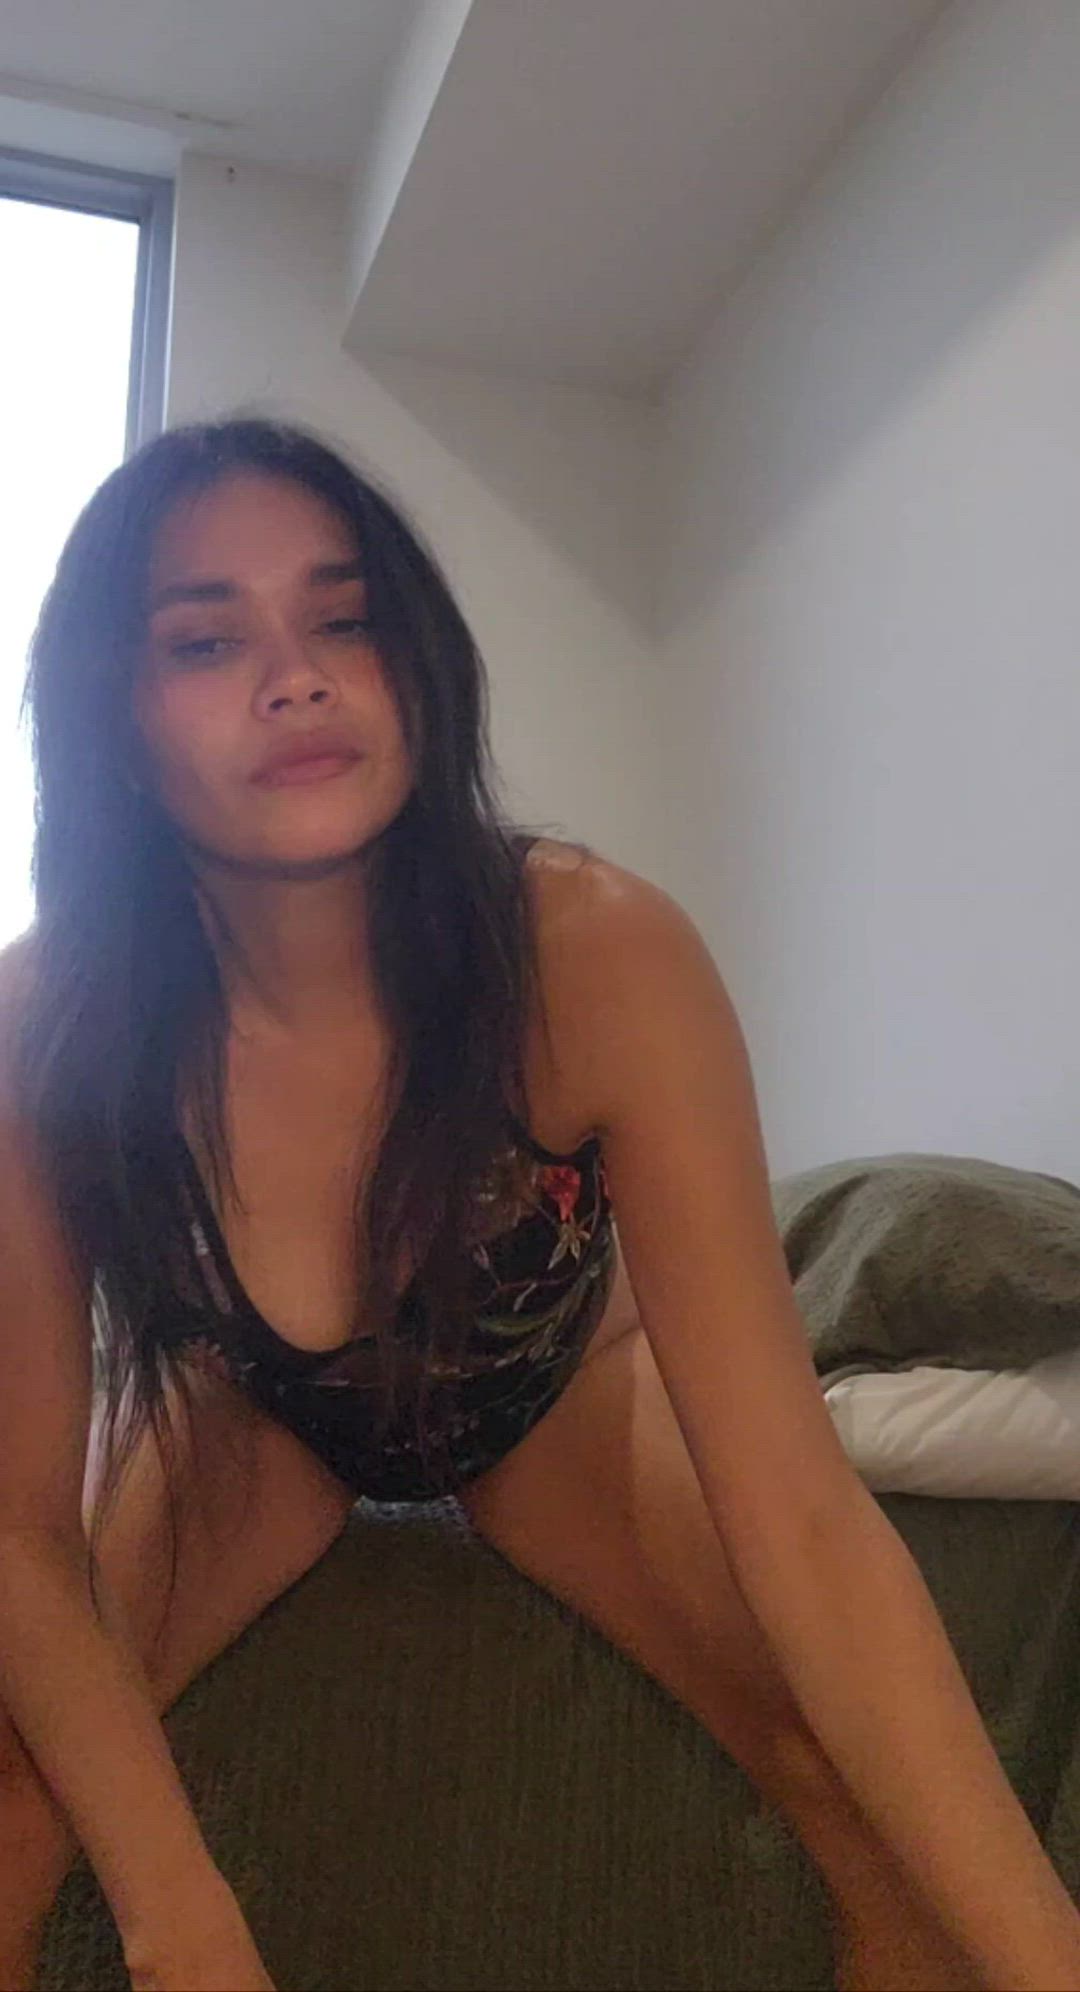 Ass porn video with onlyfans model Mia Cortez <strong>@miacortez_x</strong>